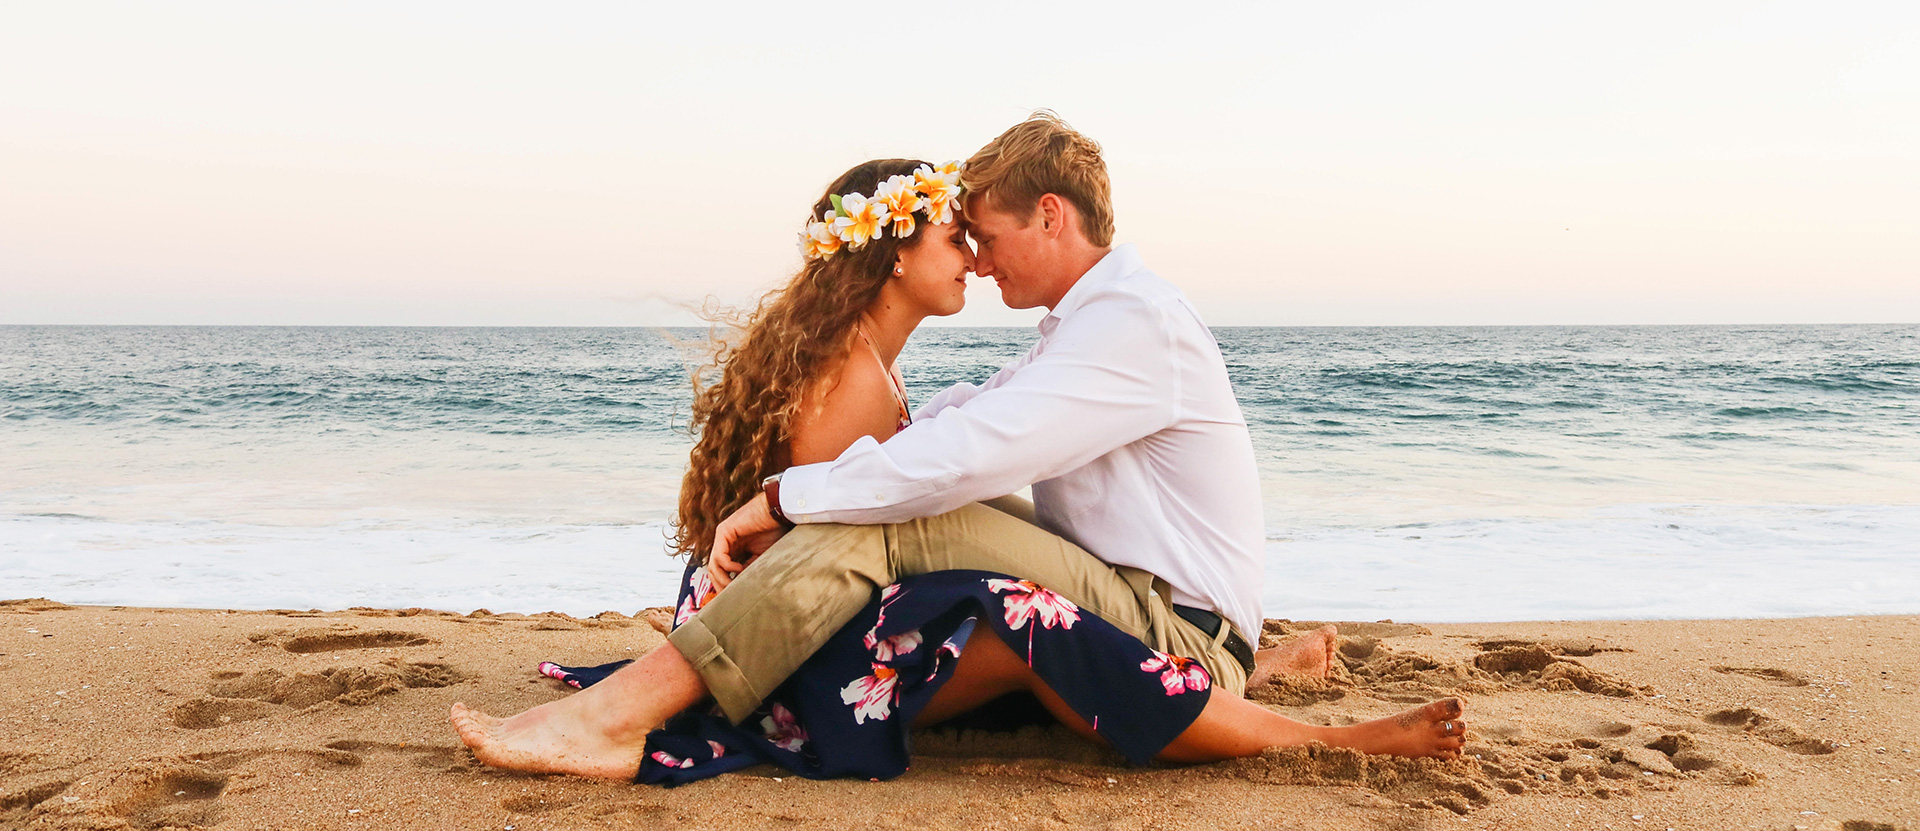 4 Things You Need To Do To Experience Lasting Love